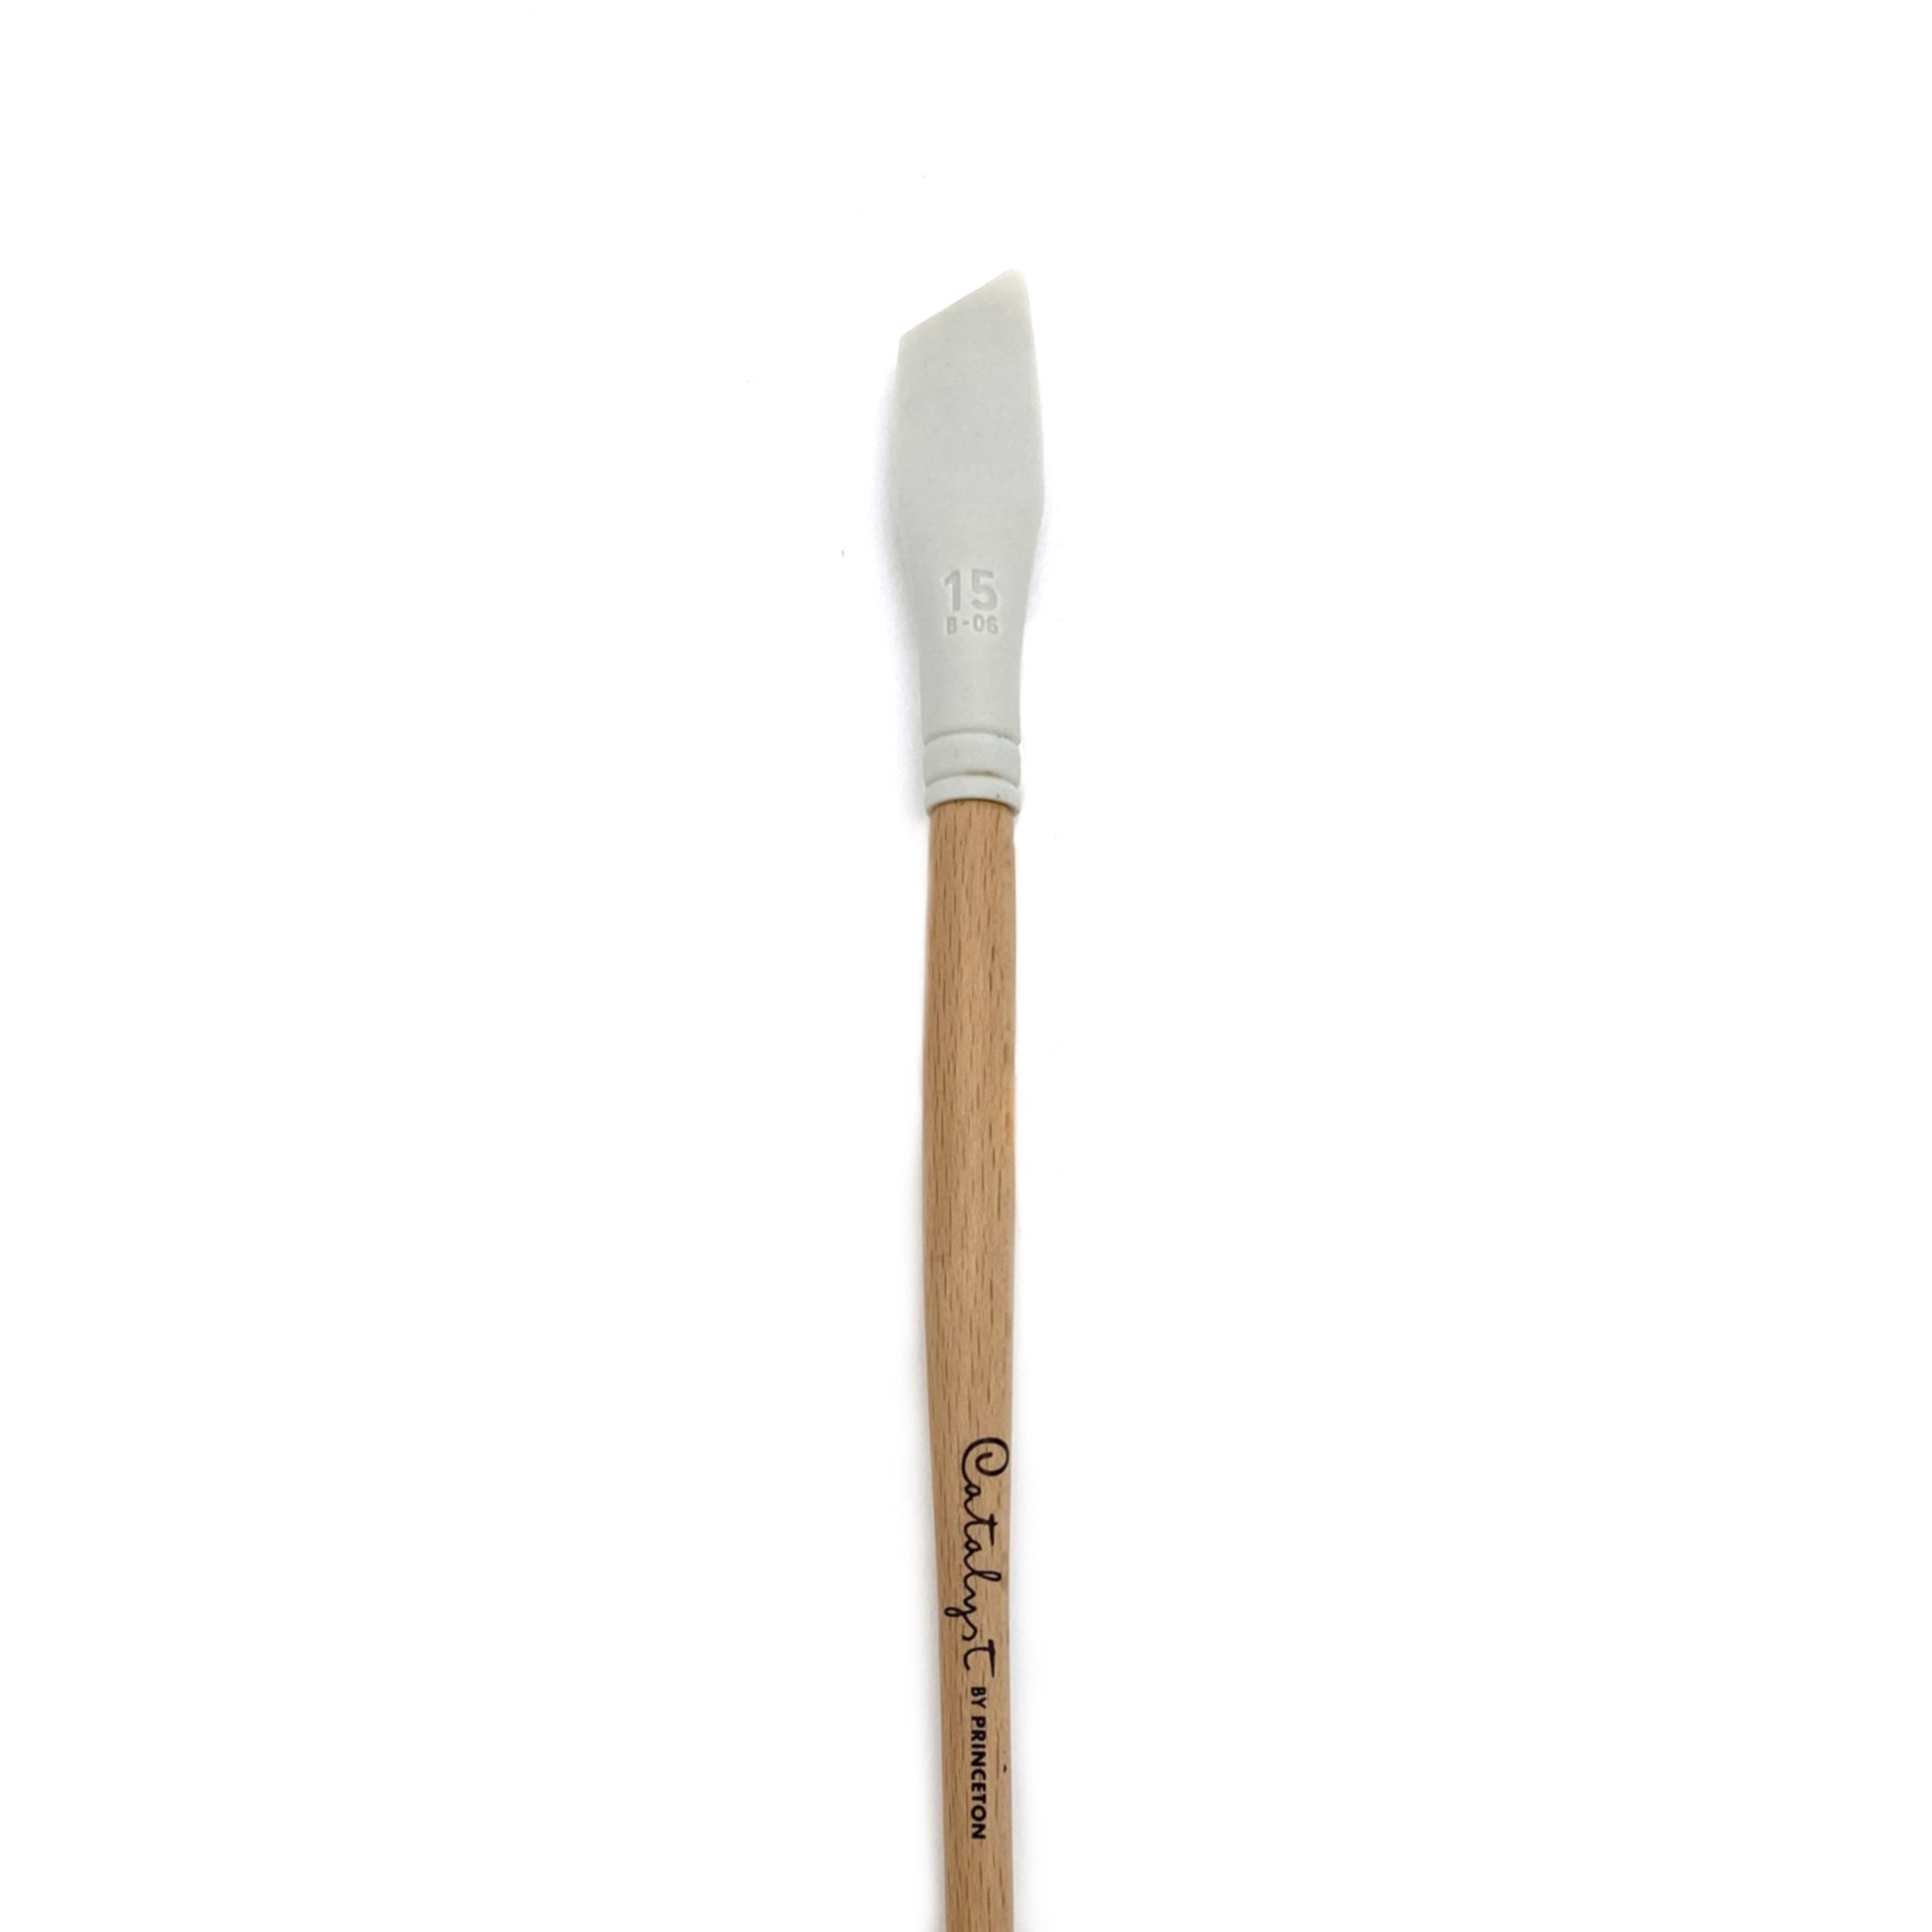 Princeton "Catalyst" Silicone Long-Handled Blades - 06 - 15MM Blade / 06 by Princeton Art & Brush Co - K. A. Artist Shop